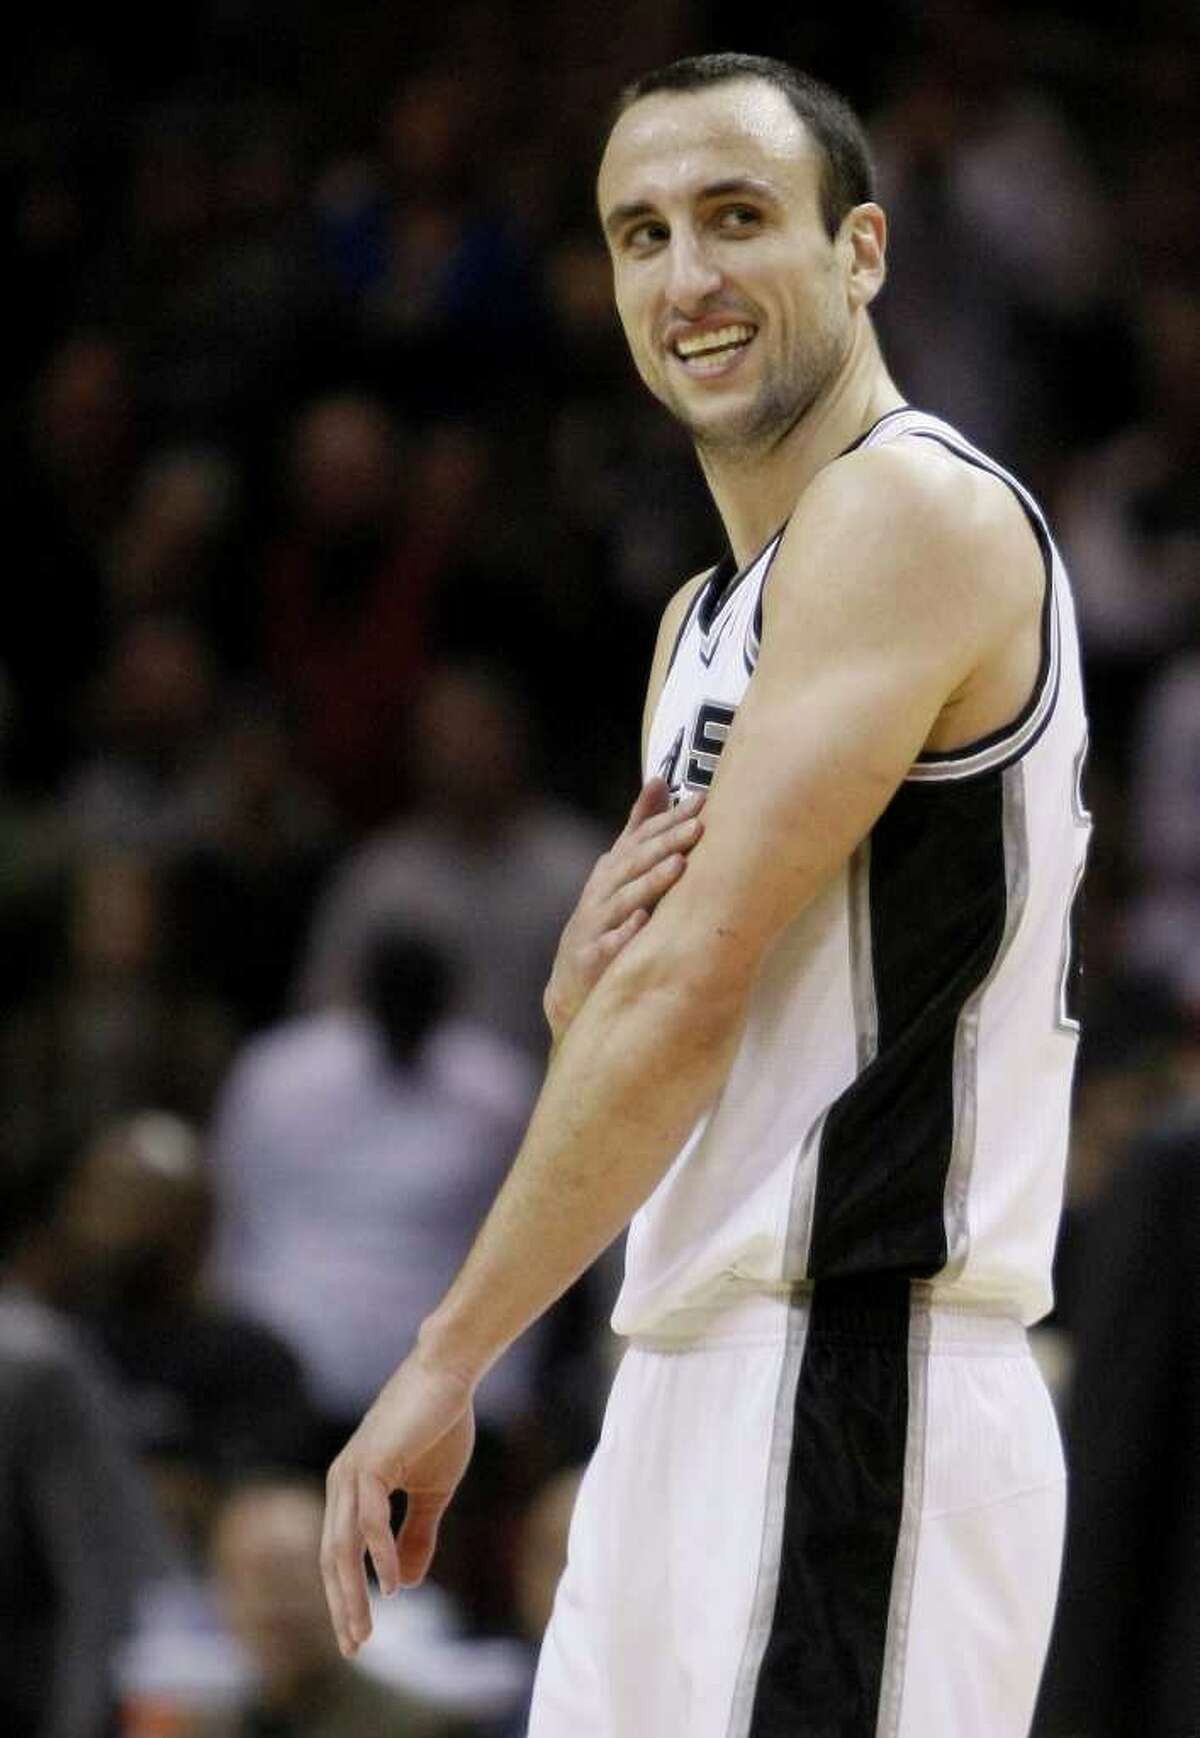 San Antonio Spurs' Manu Ginobili, of Argentina, smiles during the second half of an NBA basketball game against the Denver Nuggets, Wednesday, Dec. 22, 2010, in San Antonio. San Antonio won 109-103.